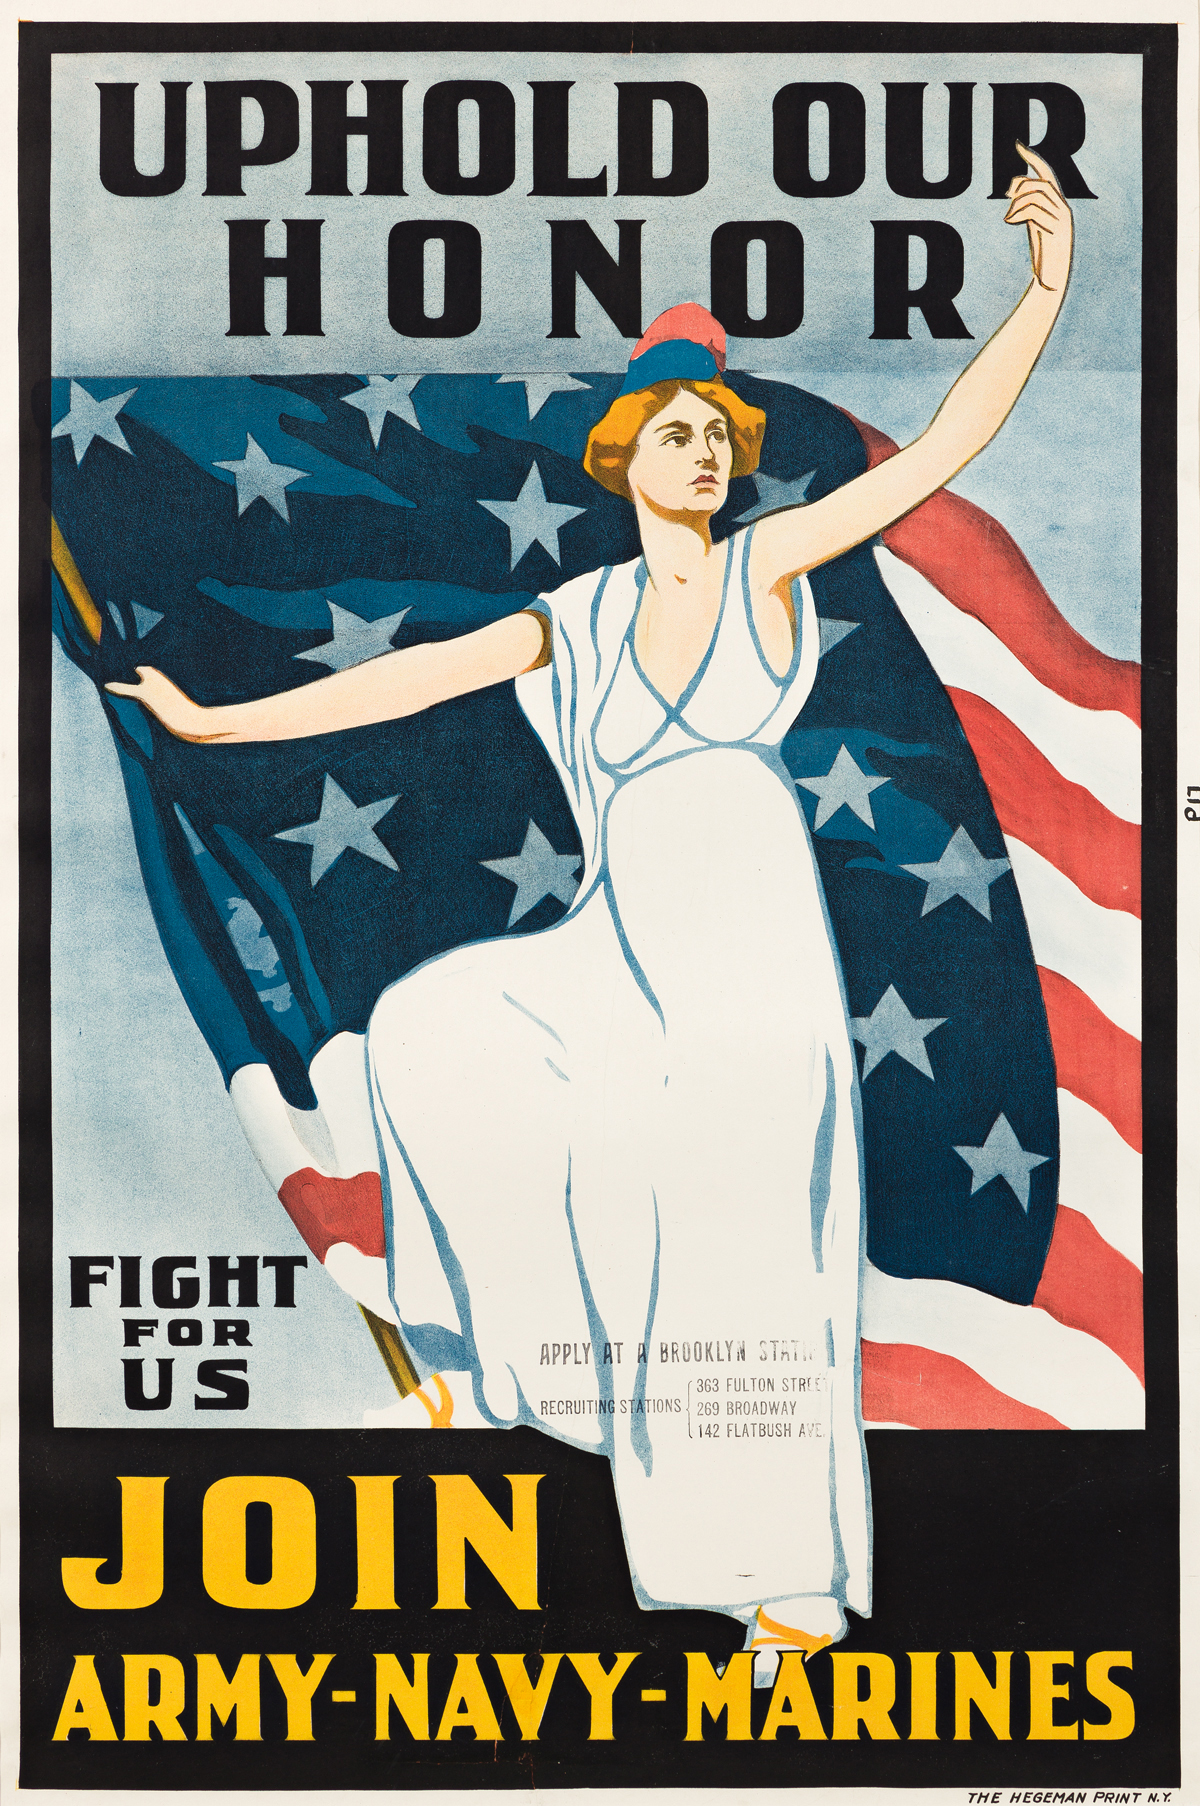 DESIGNER UNKNOWN.  UPHOLD OUR HONOR / JOIN ARMY - NAVY - MARINES. 1917. 39¼x26 inches, 99½x66 cm. The Hegeman Print, [New York.]